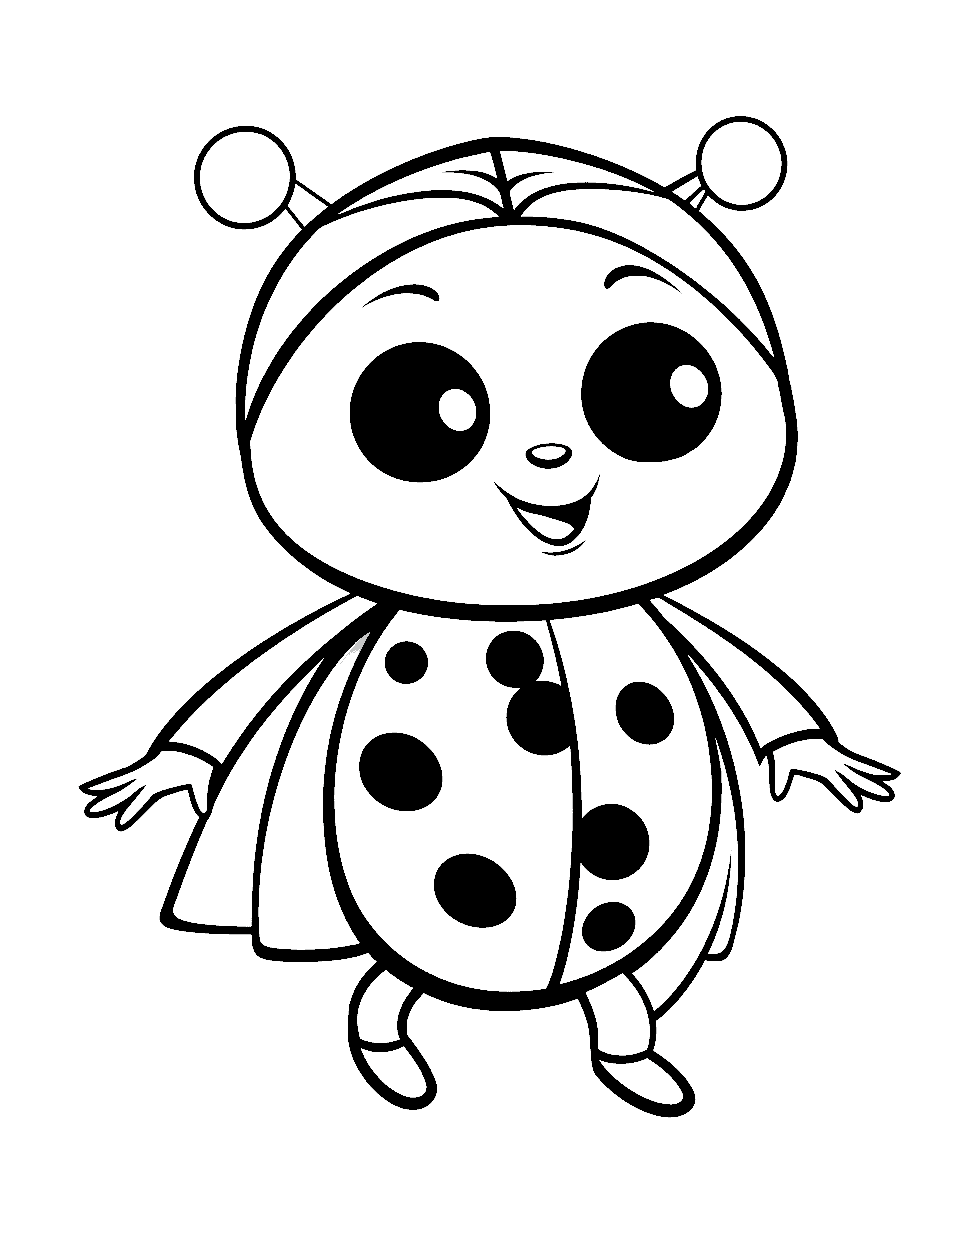 Super Ladybug Pose Coloring Page - A hero ladybug striking a heroic pose with a cape.